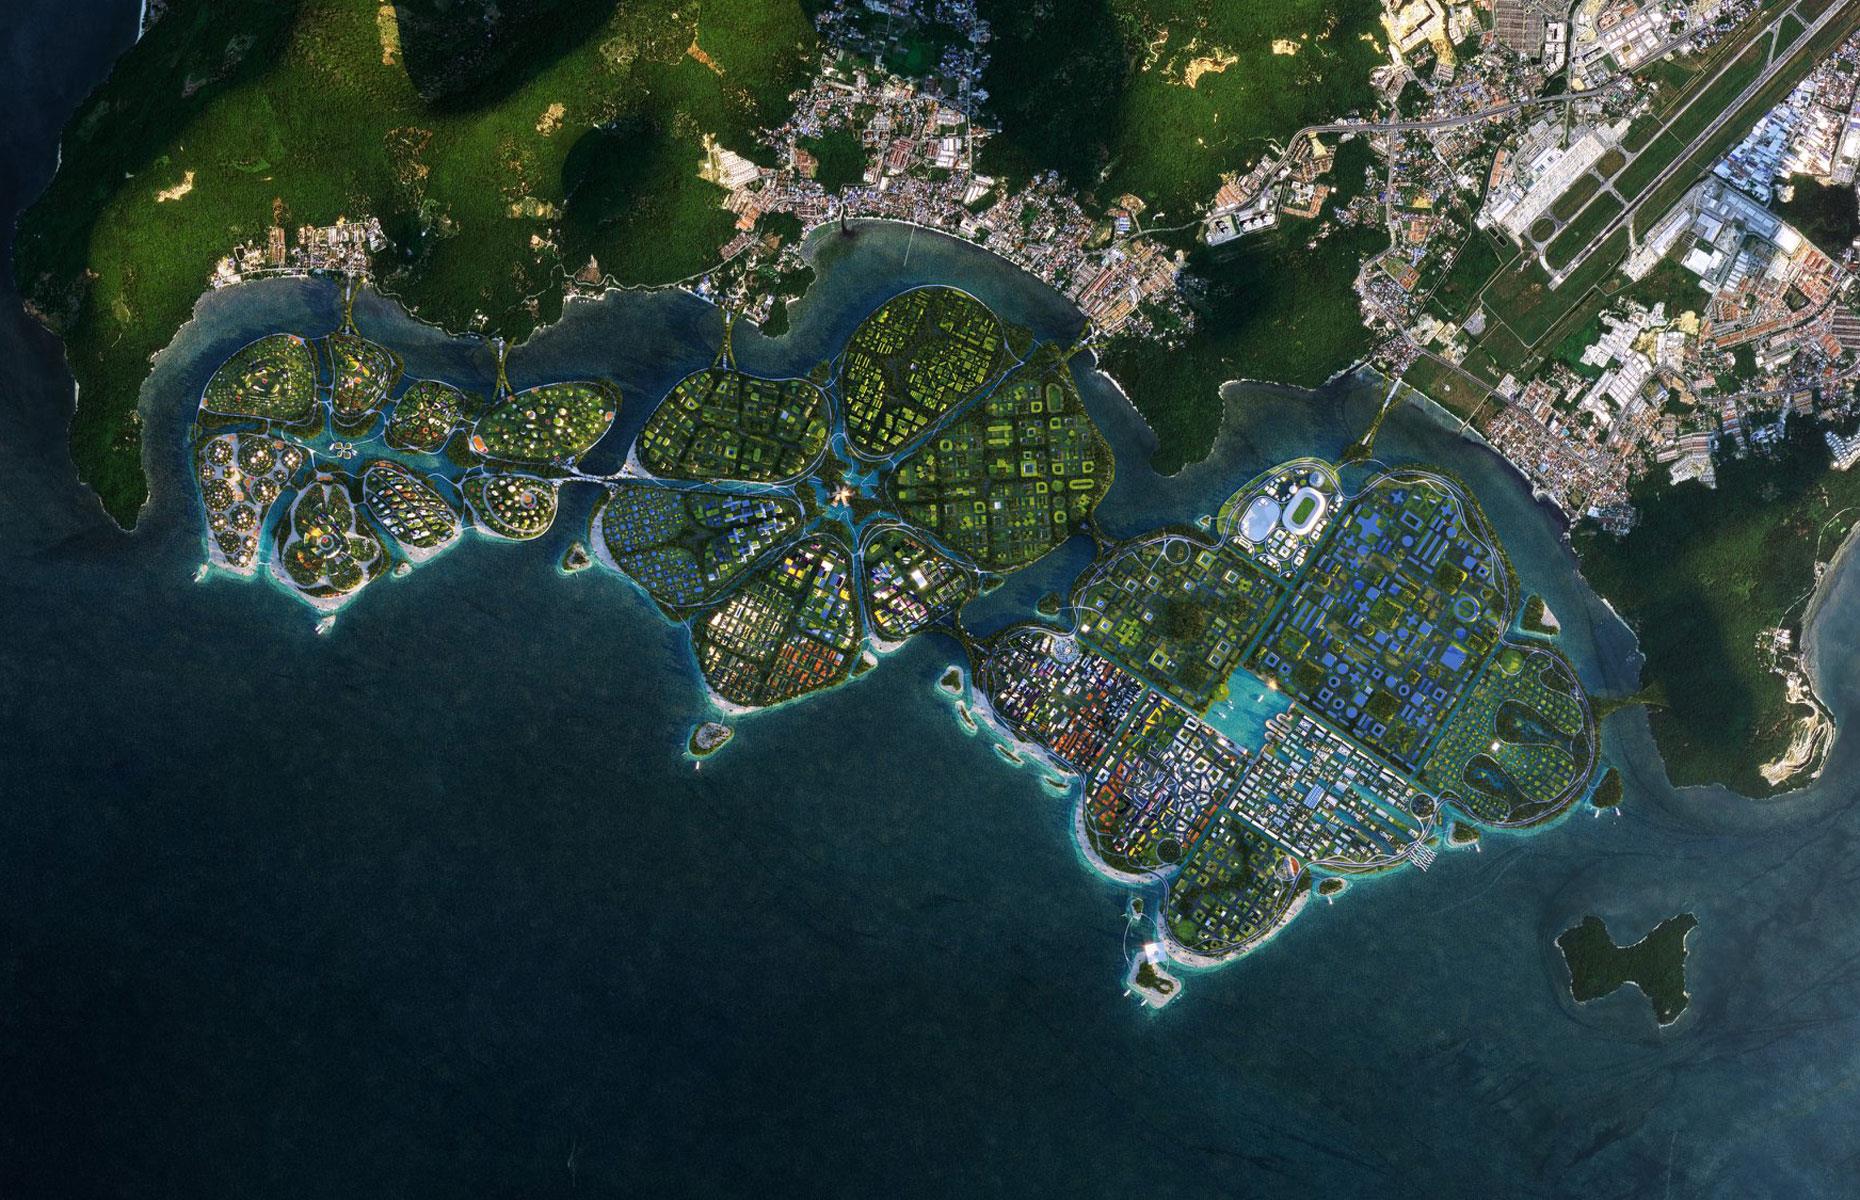 <p>In 2020, Telosa designer BIG, together with architectural firms Hijjas and Ramboll, won an international competition launched by the Penang State Government to come up with a sustainable master plan for three completely new isles off the south coast of Penang Island. Fittingly called <a href="https://big.dk/projects/biodivercity-penang-6542">BiodiverCity</a>, the winning entry imagines the isles as mixed-use 'lilypads' with acres of public beaches, parks and waterfront.</p>